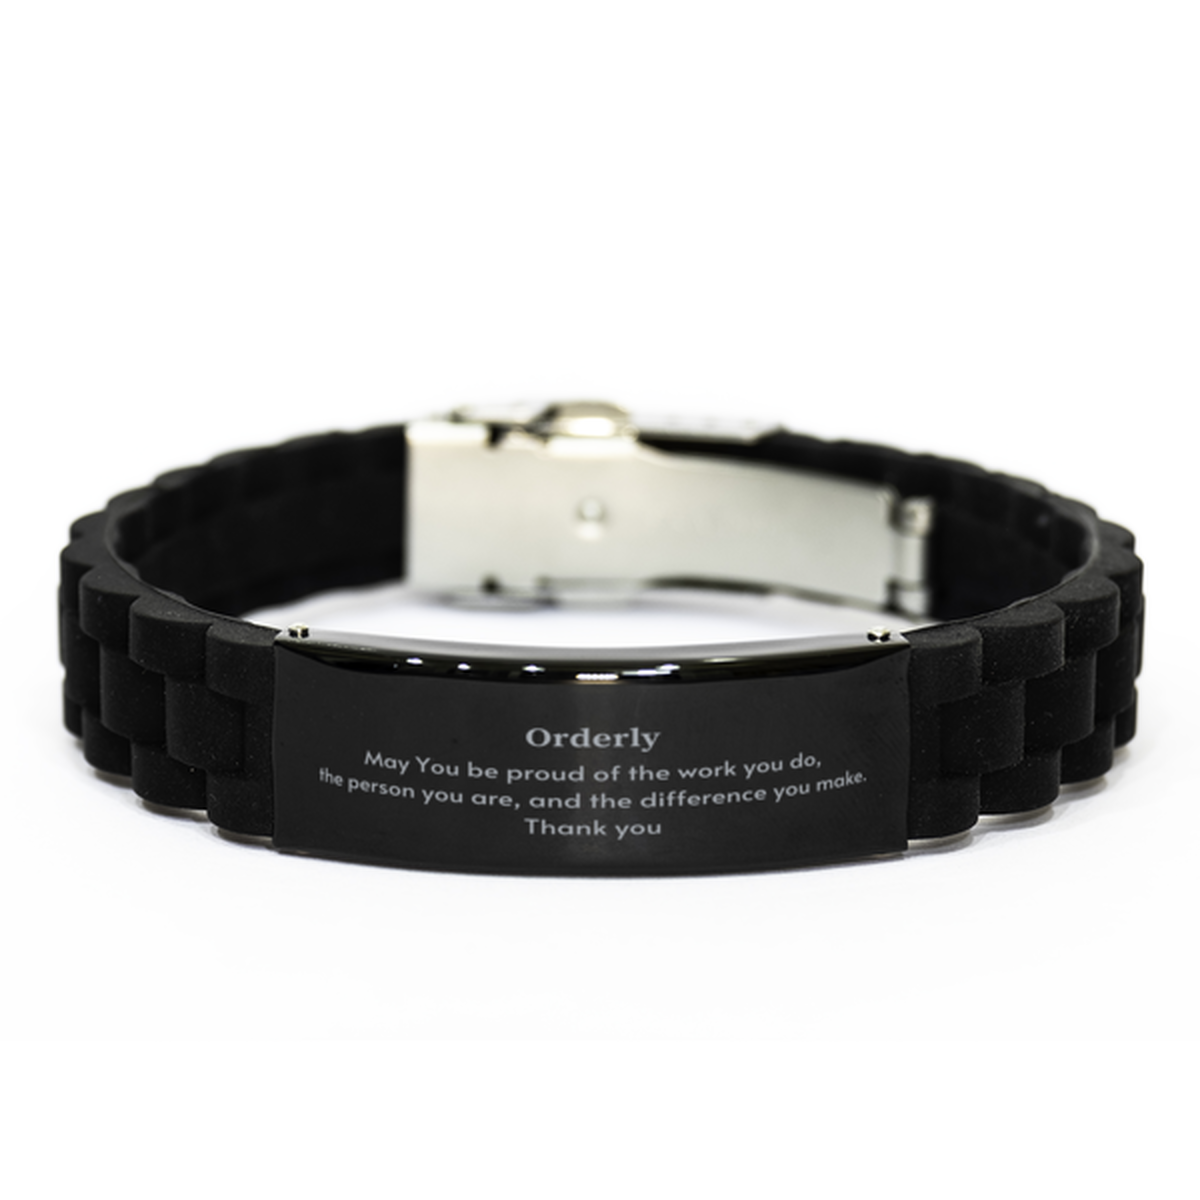 Heartwarming Black Glidelock Clasp Bracelet Retirement Coworkers Gifts for Orderly, Orderly May You be proud of the work you do, the person you are Gifts for Boss Men Women Friends